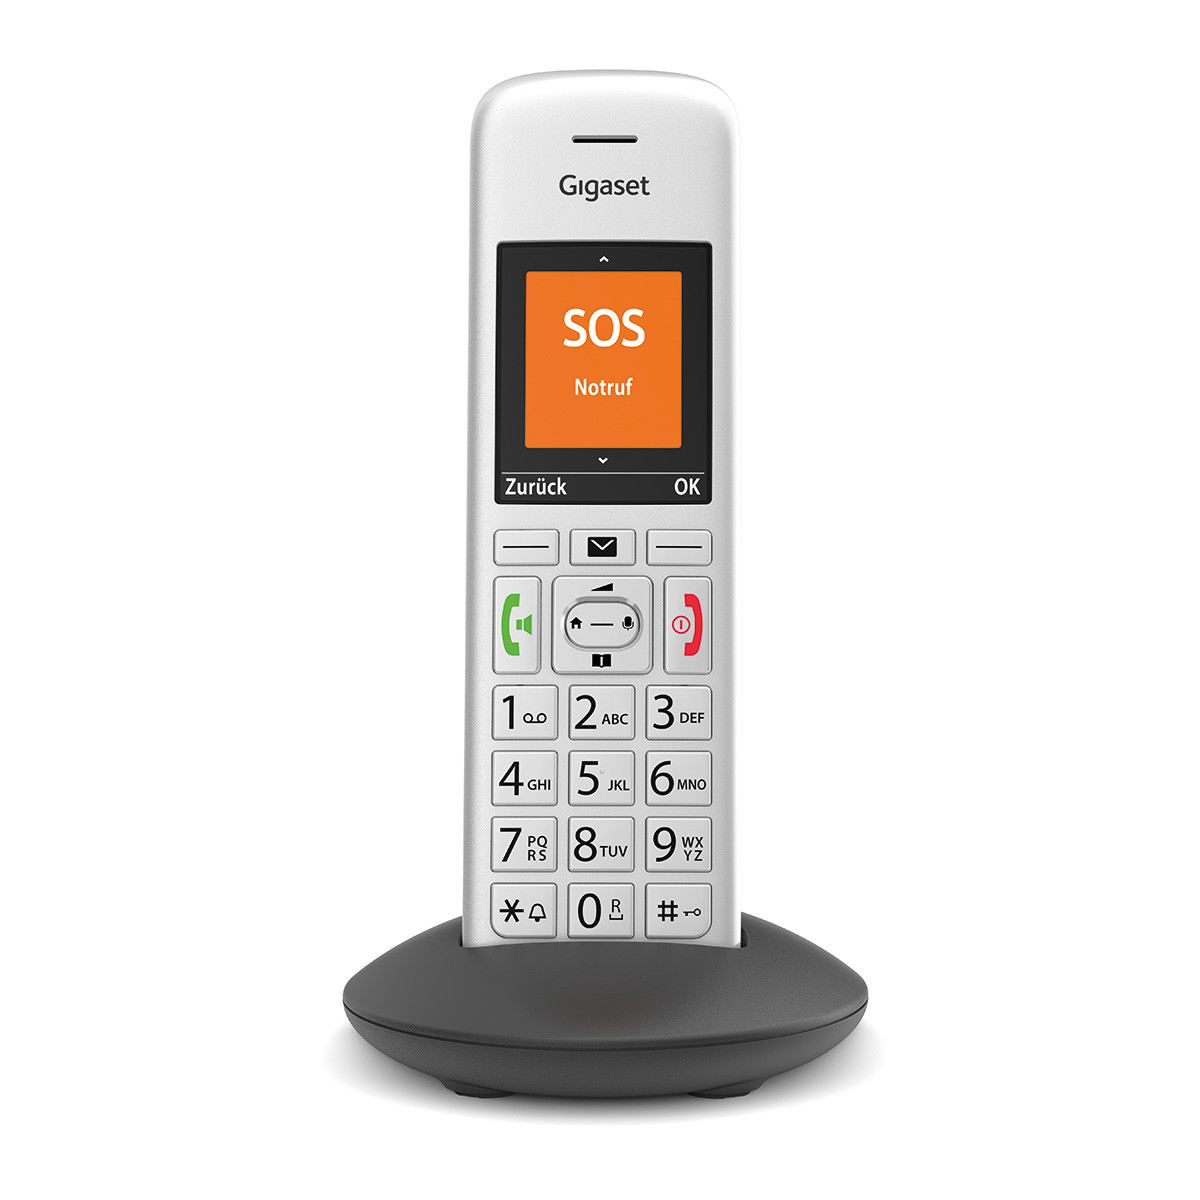 S30852-H2968-B104 UNIFY GIGASET OPENSTAGE E390HX - Analog/DECT telephone - Wireless handset - Speakerphone - 200 entries - Caller ID - Silver